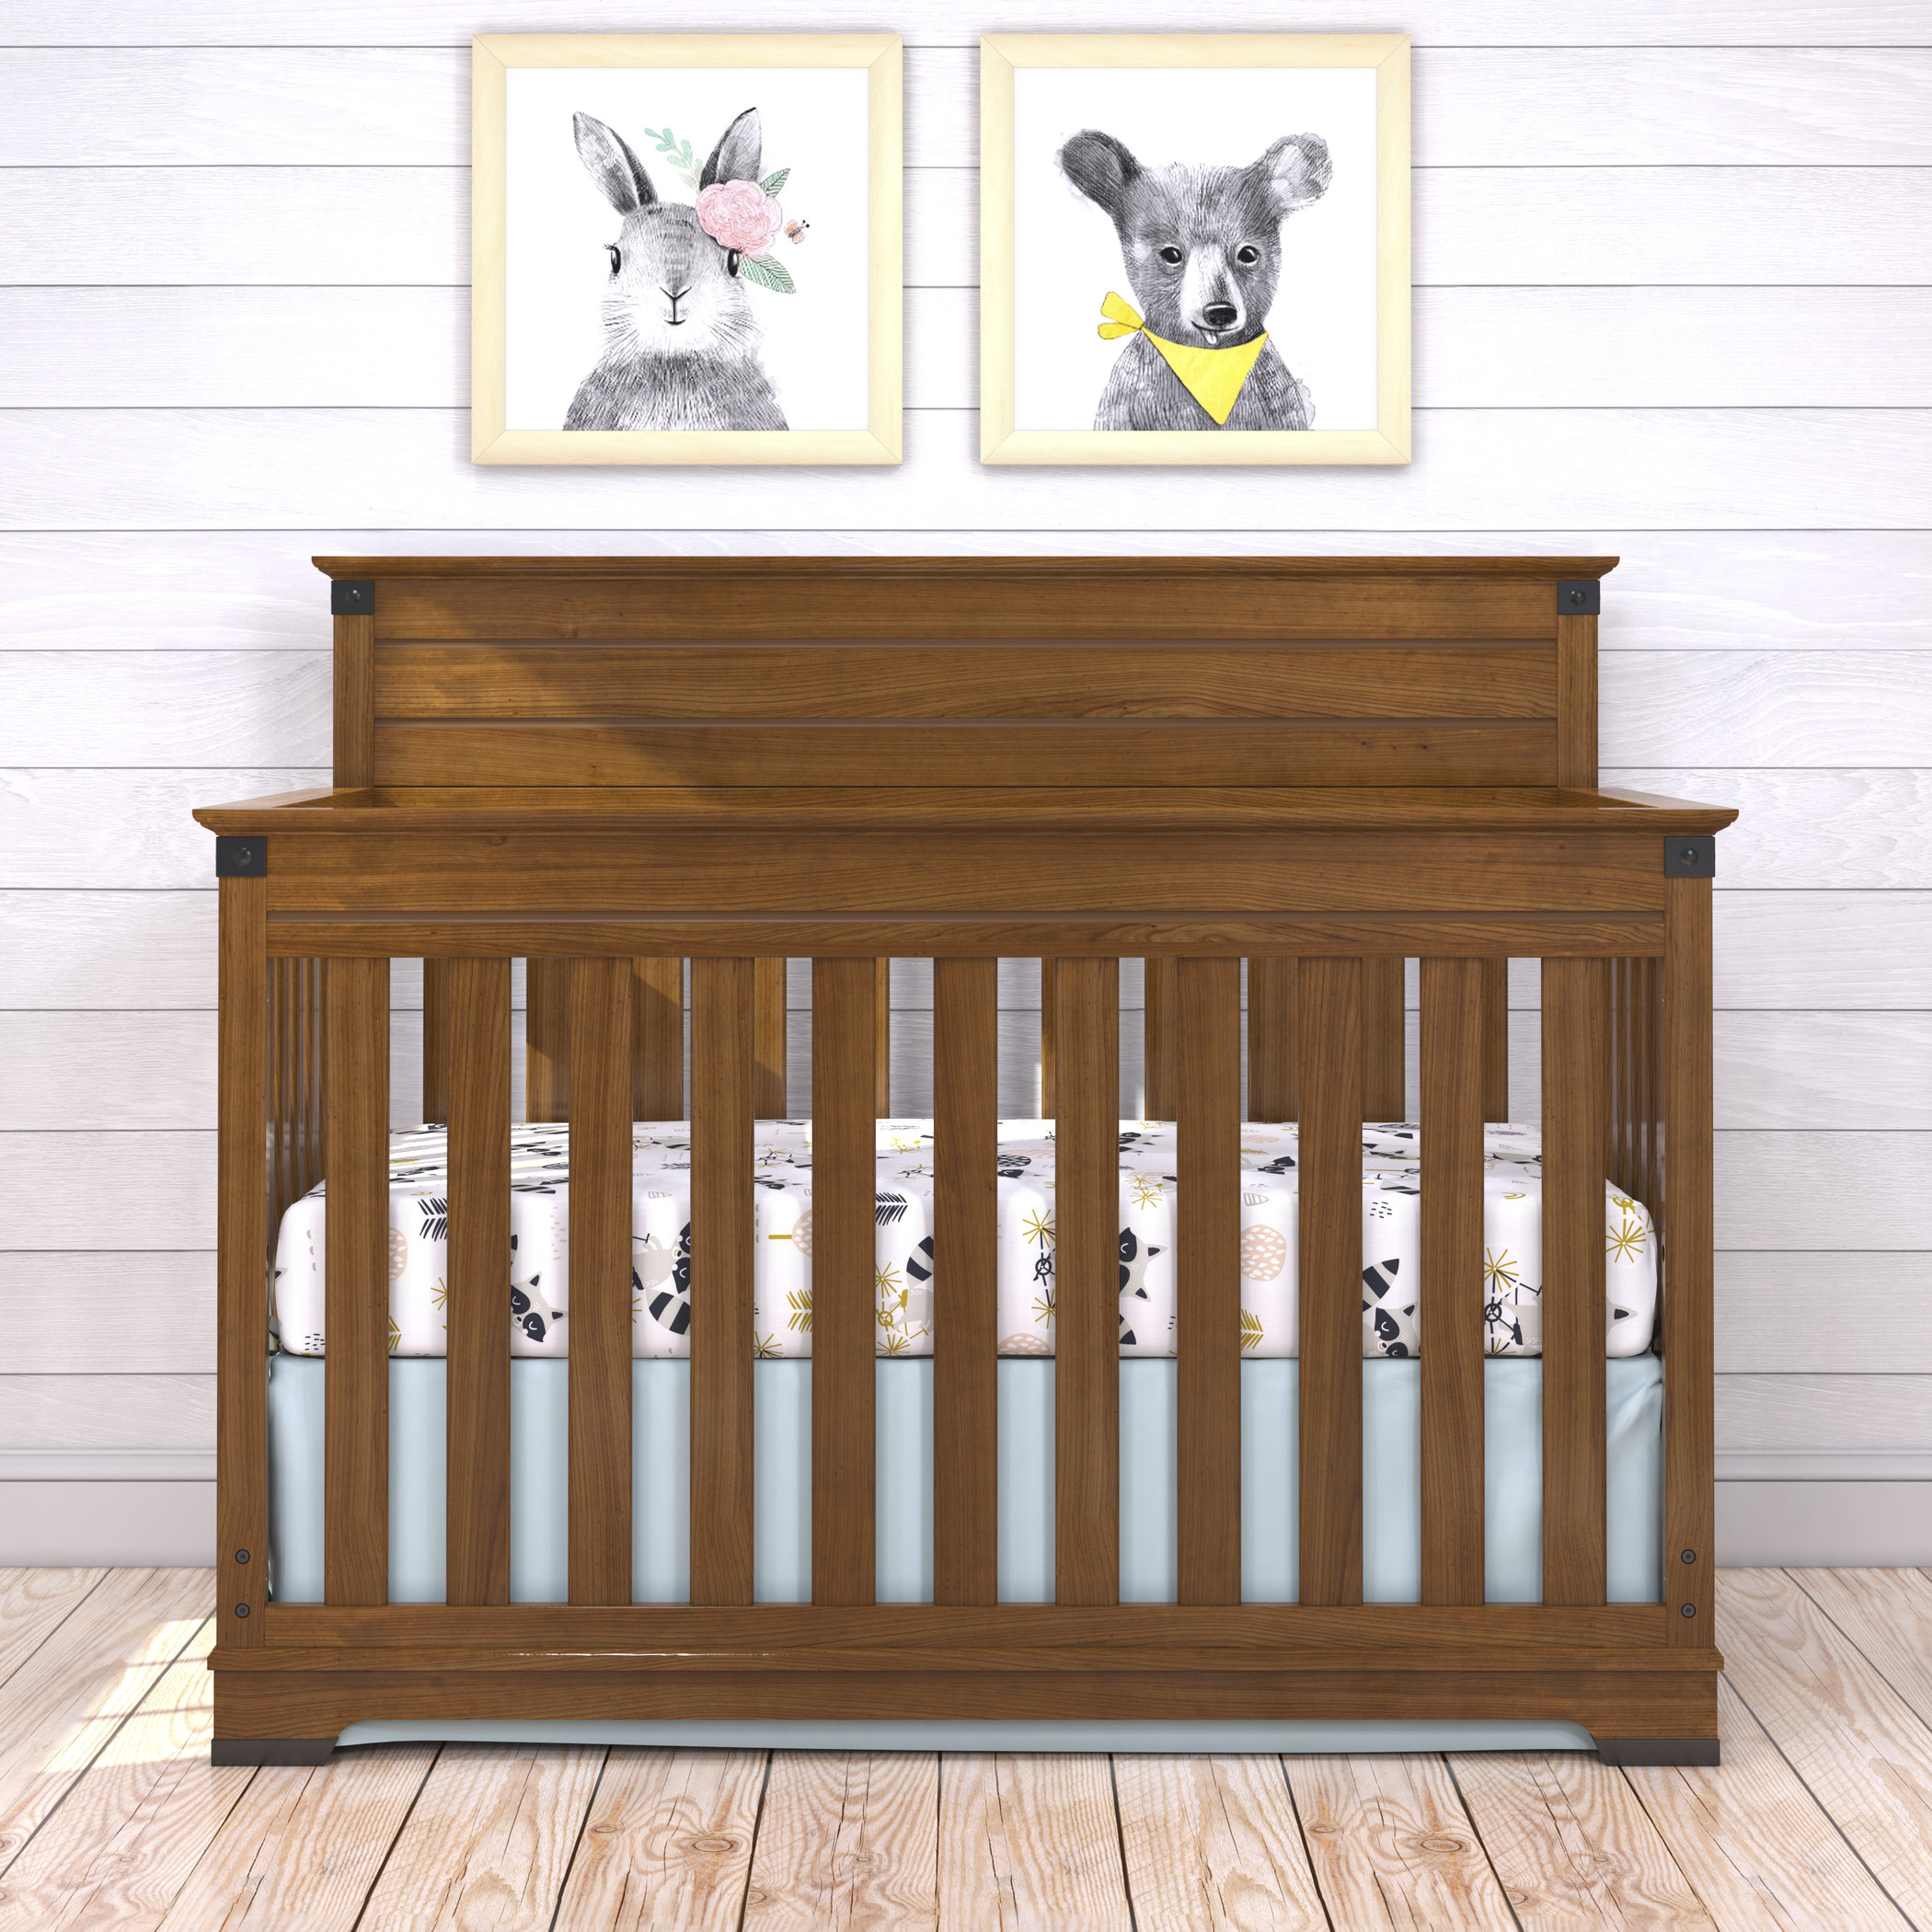 Slate Brown Child Craft Stanford 4-in-1 Convertible Crib 